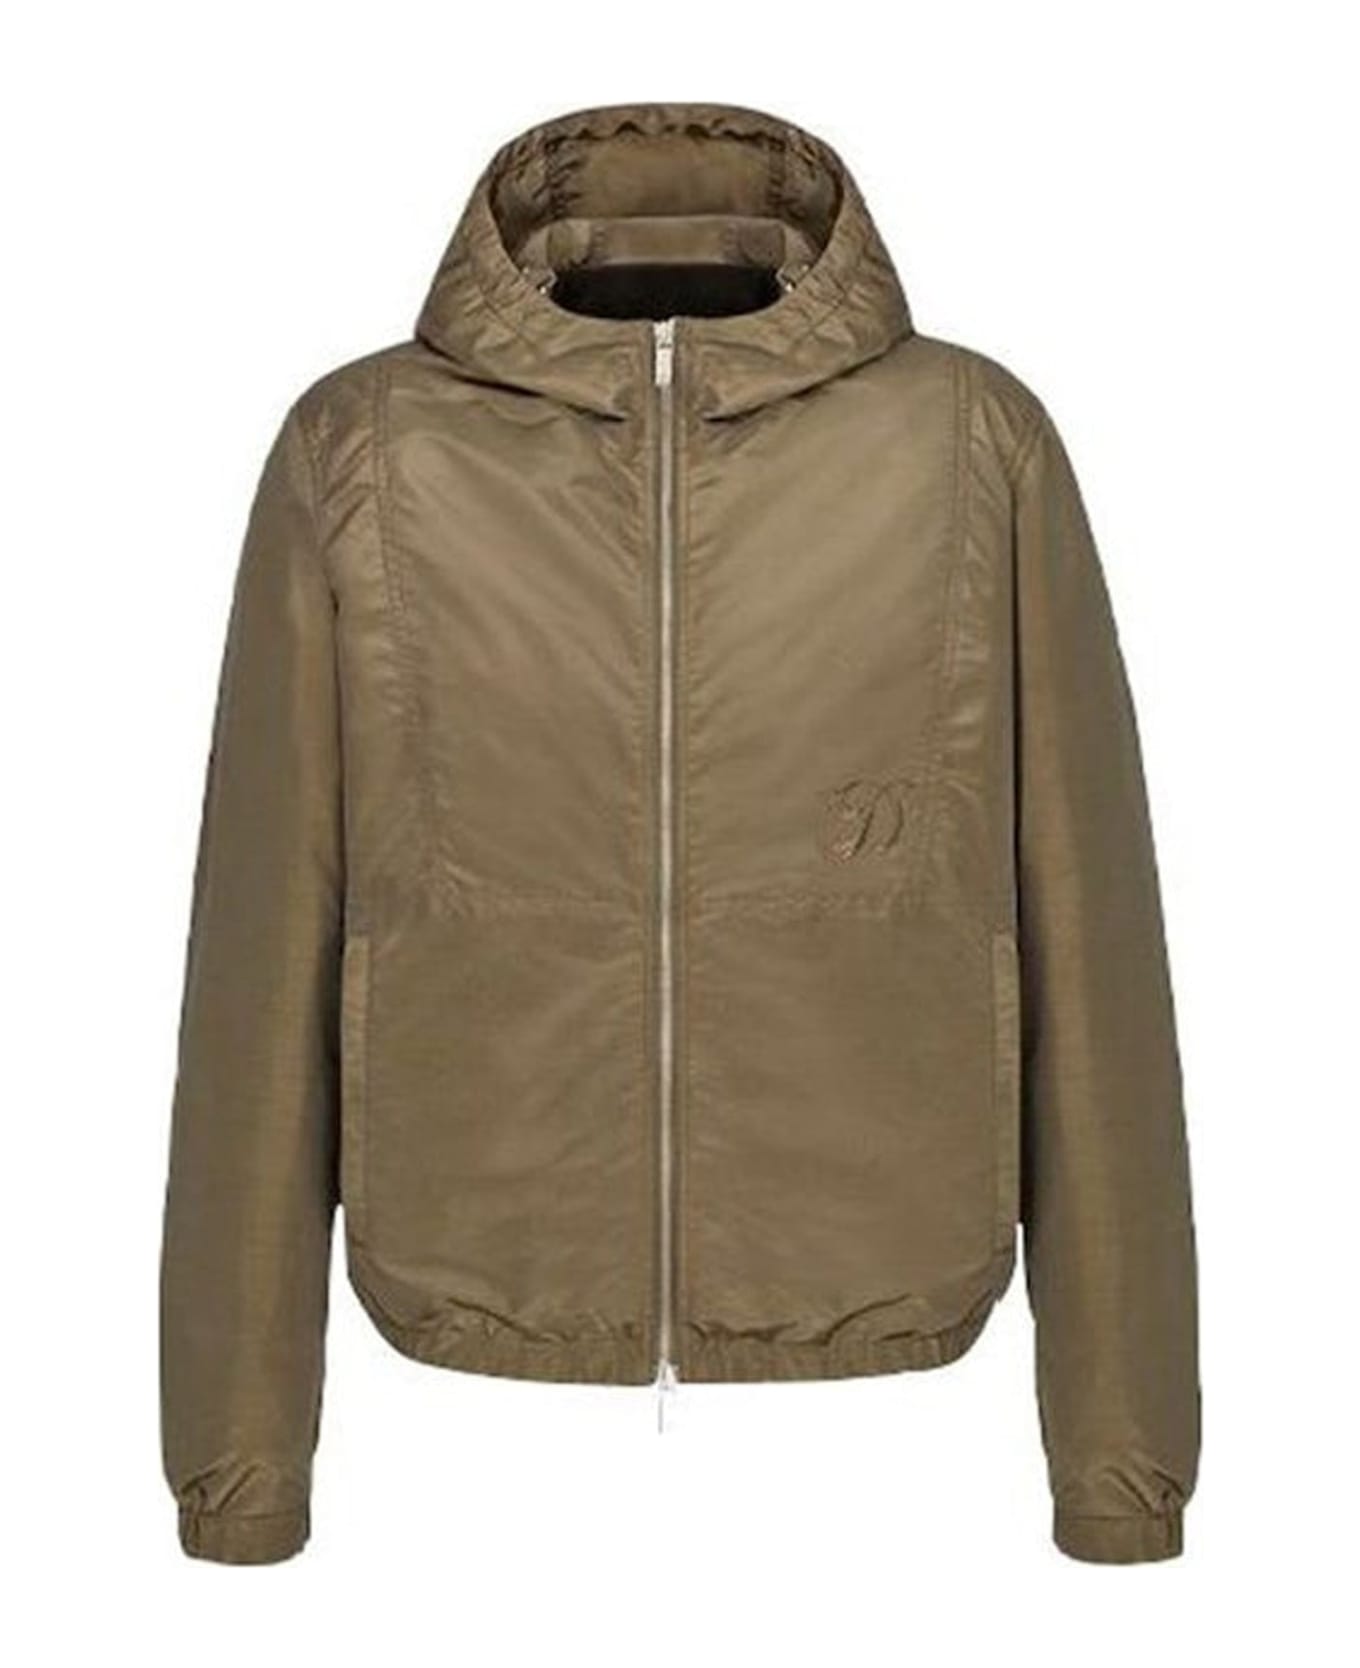 Dior X Kenny Scharf Embroidered Logo Hooded Jacket - Green